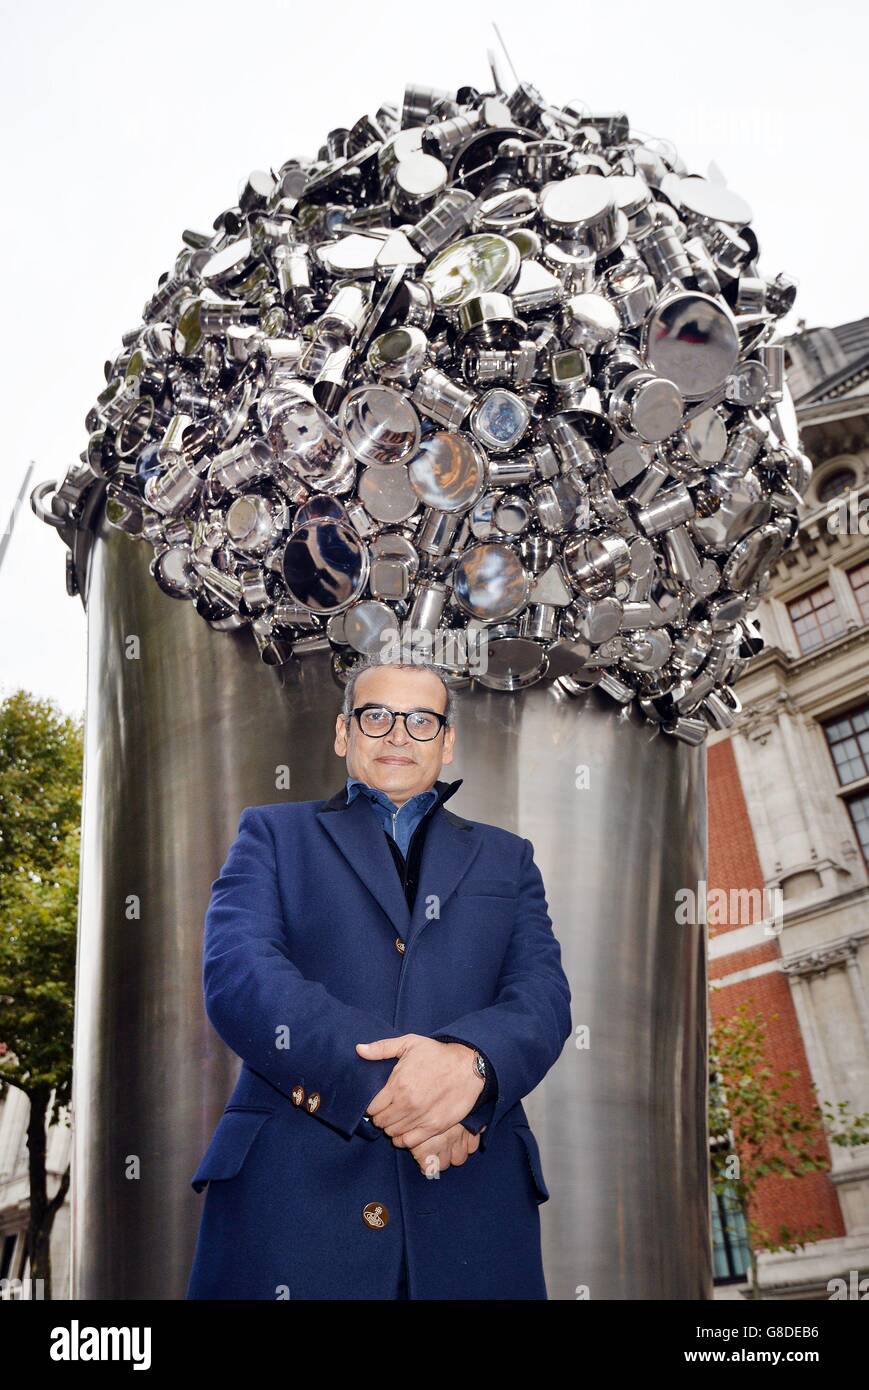 Contemporary Indian artist Subodh Gupta stands in front of his latest installation 'When Soak Becomes Spill', a six metre high stainless steel bucket overflowing with hundreds of pots, pans and cooking containers, which stands outside the Victoria and Albert Museum in Kensington, London. Stock Photo